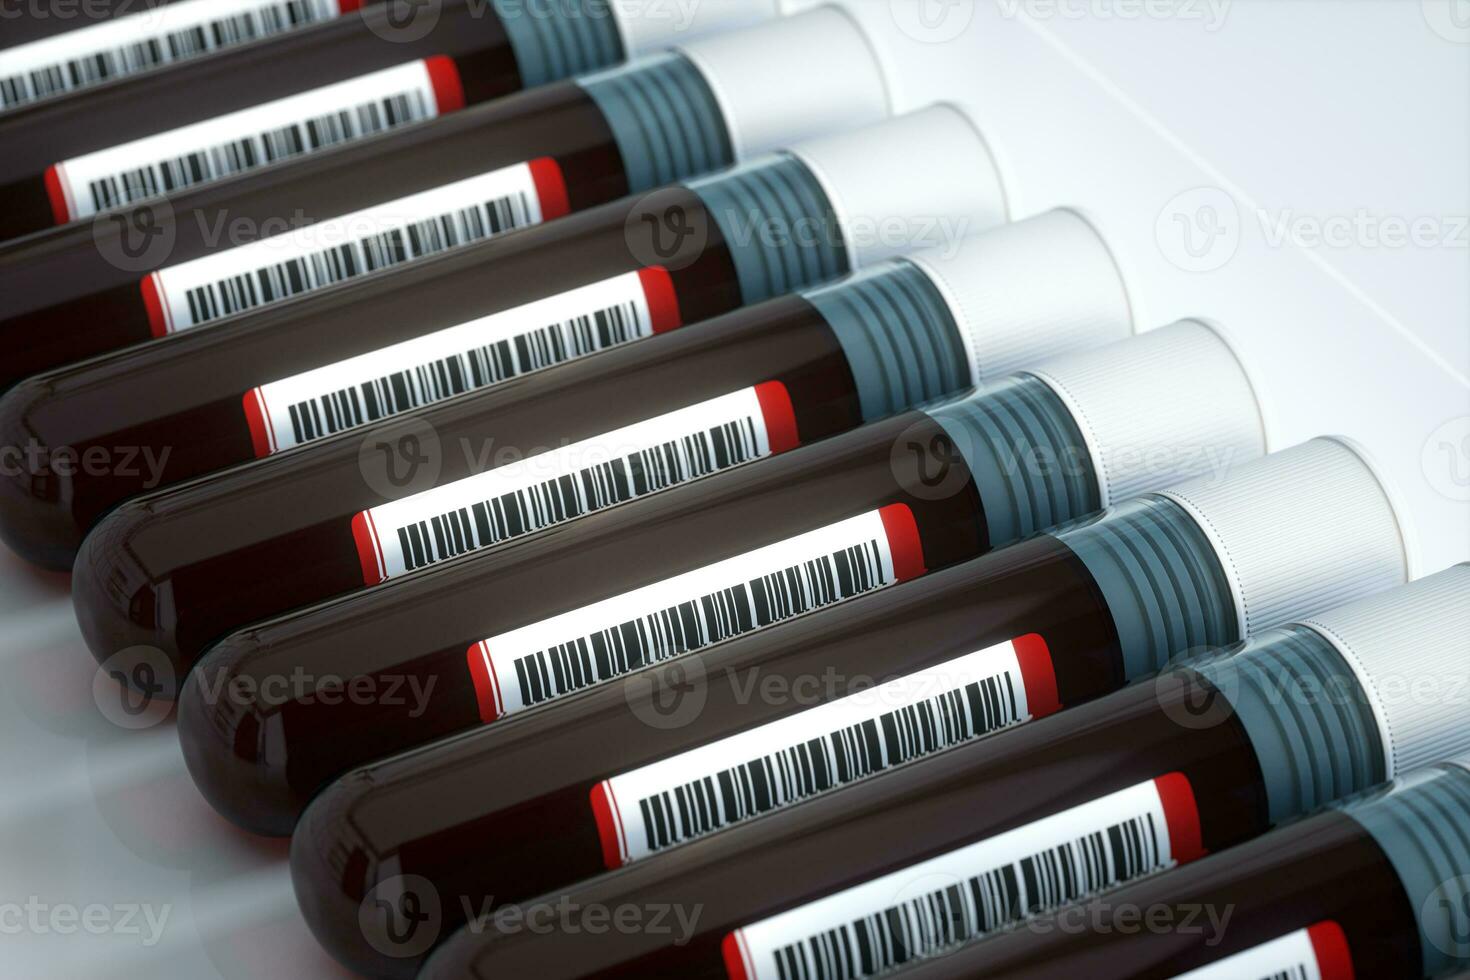 Blood test tubes with laboratory, 3d rendering. photo